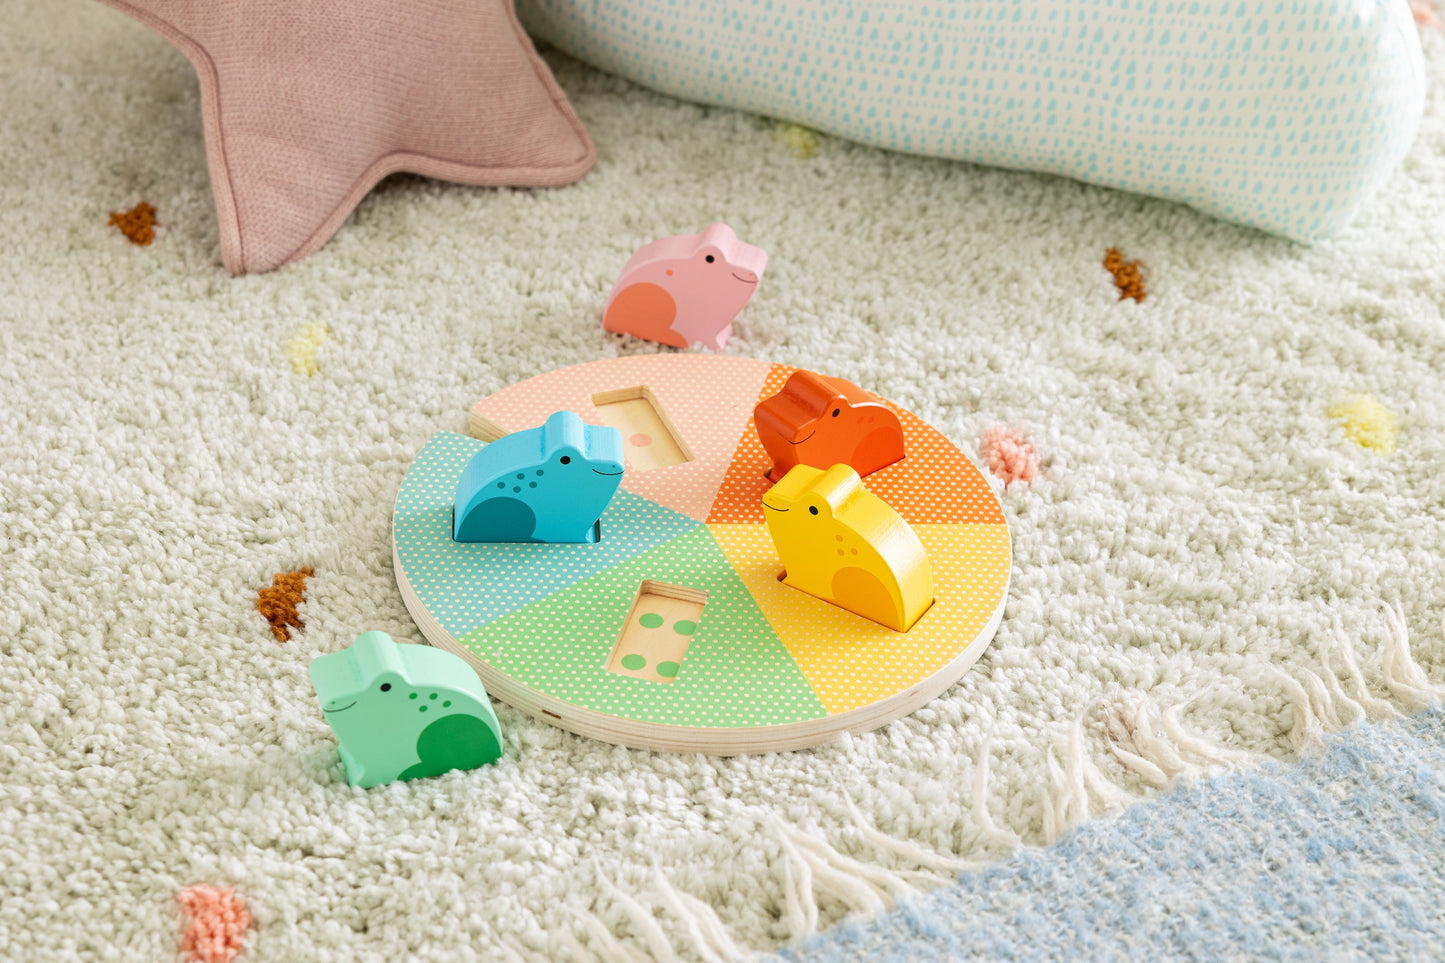 Nursery Counting Puzzle: Five Little Speckled Frogs